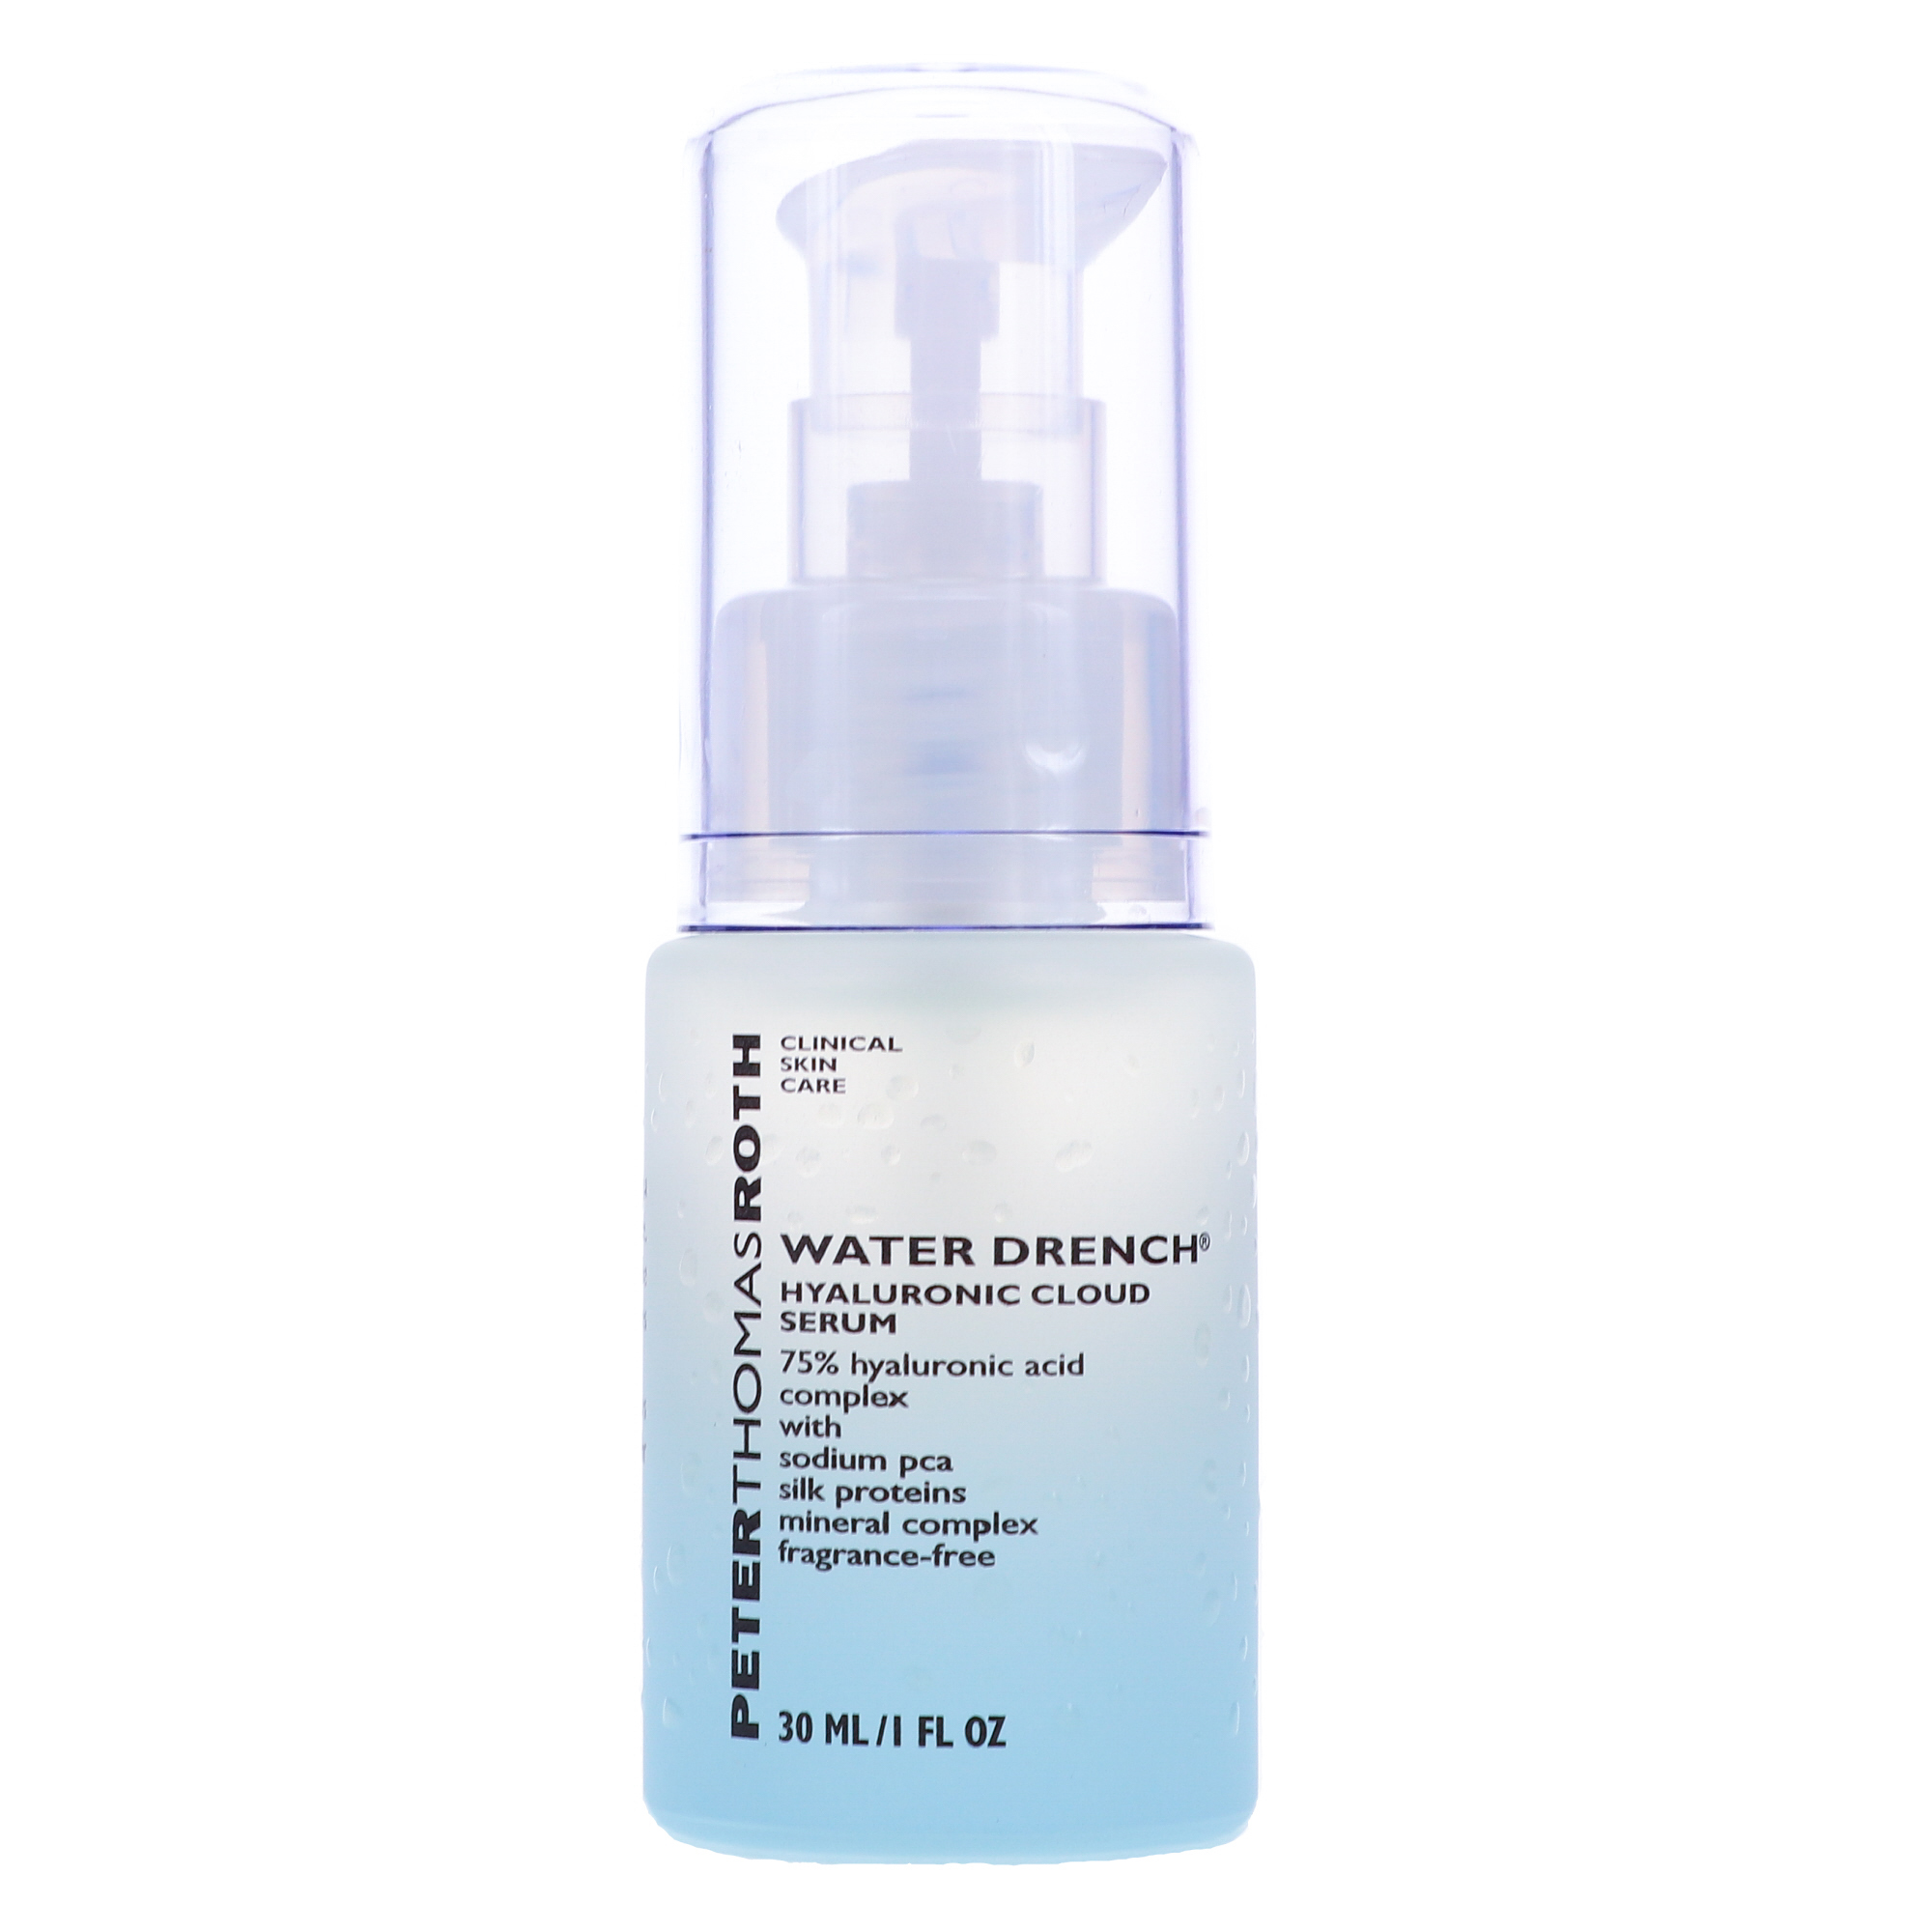 Peter Thomas Roth Water Drench Hyaluronic Cloud Serum 1 oz - image 1 of 2